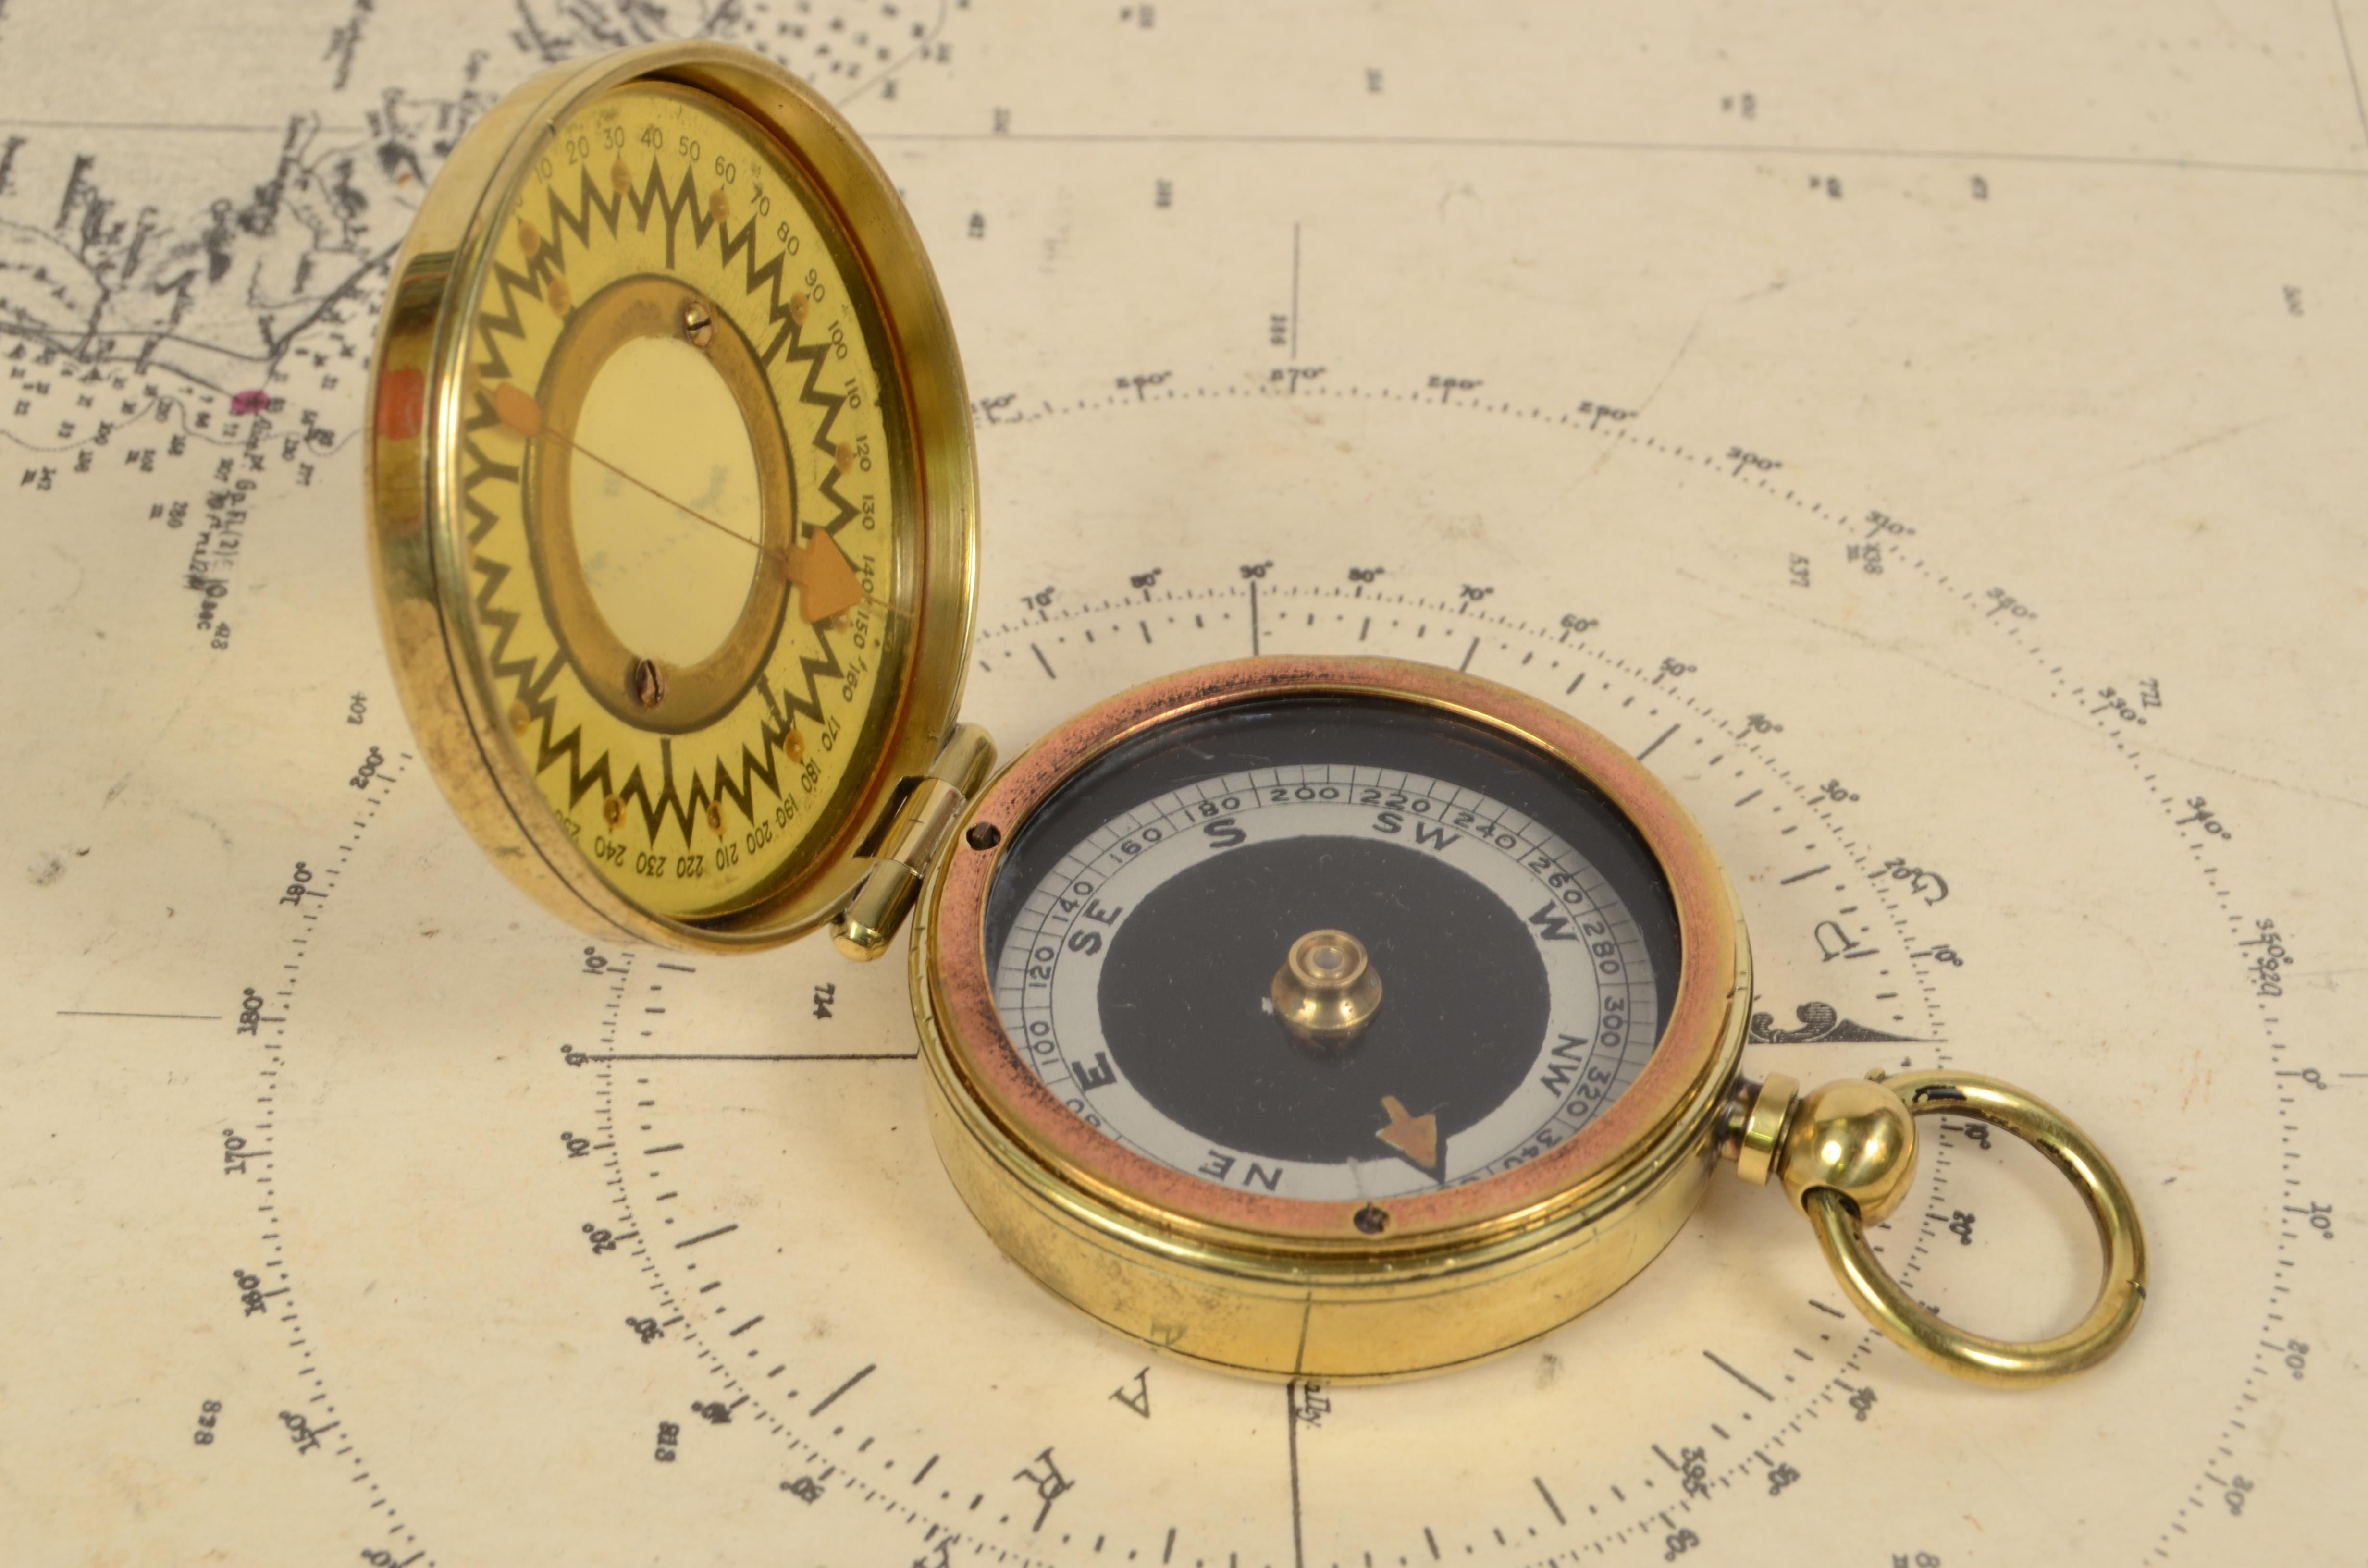 Brass survey compass made in 1914 circa, signed The Magnapole;
and realized by Negretty & Zambra small compass used away from magnetic fields to check the ship’s course. The compass is complete with a goniometric circle and a block of compass card.